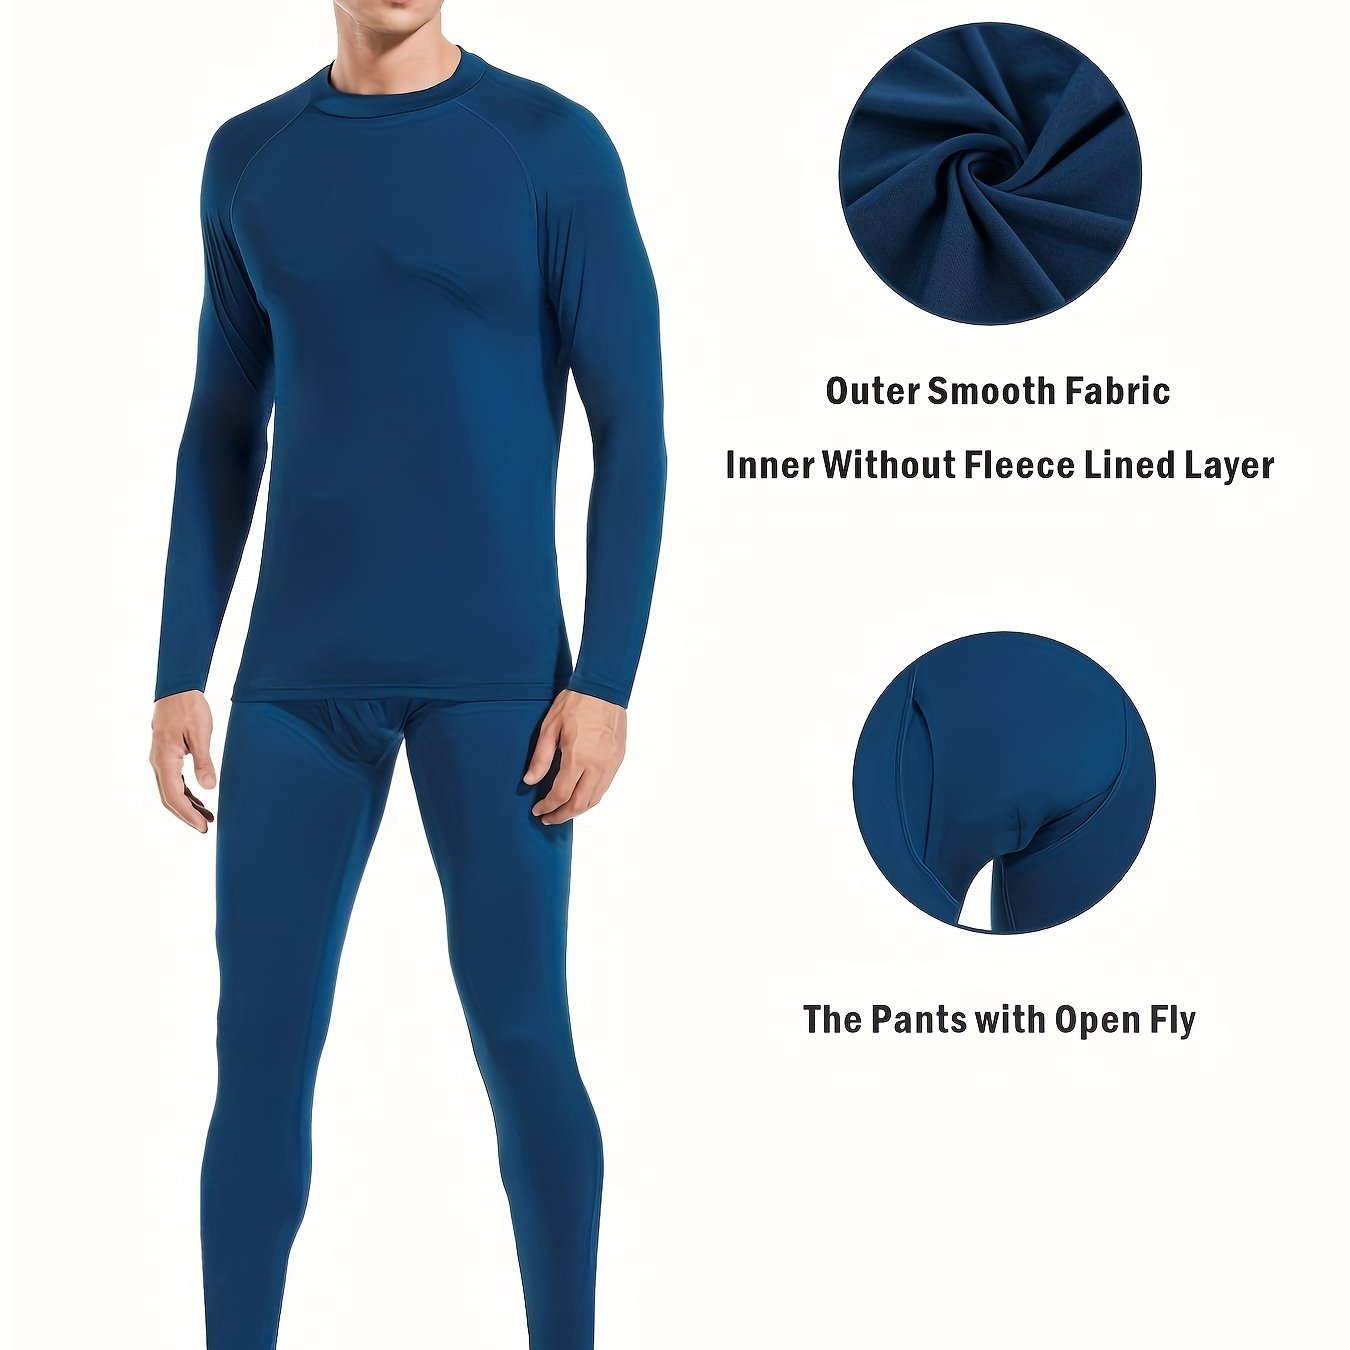 WEERTI Thermal Underwear for Men Long Johns With Fleece Lined Long